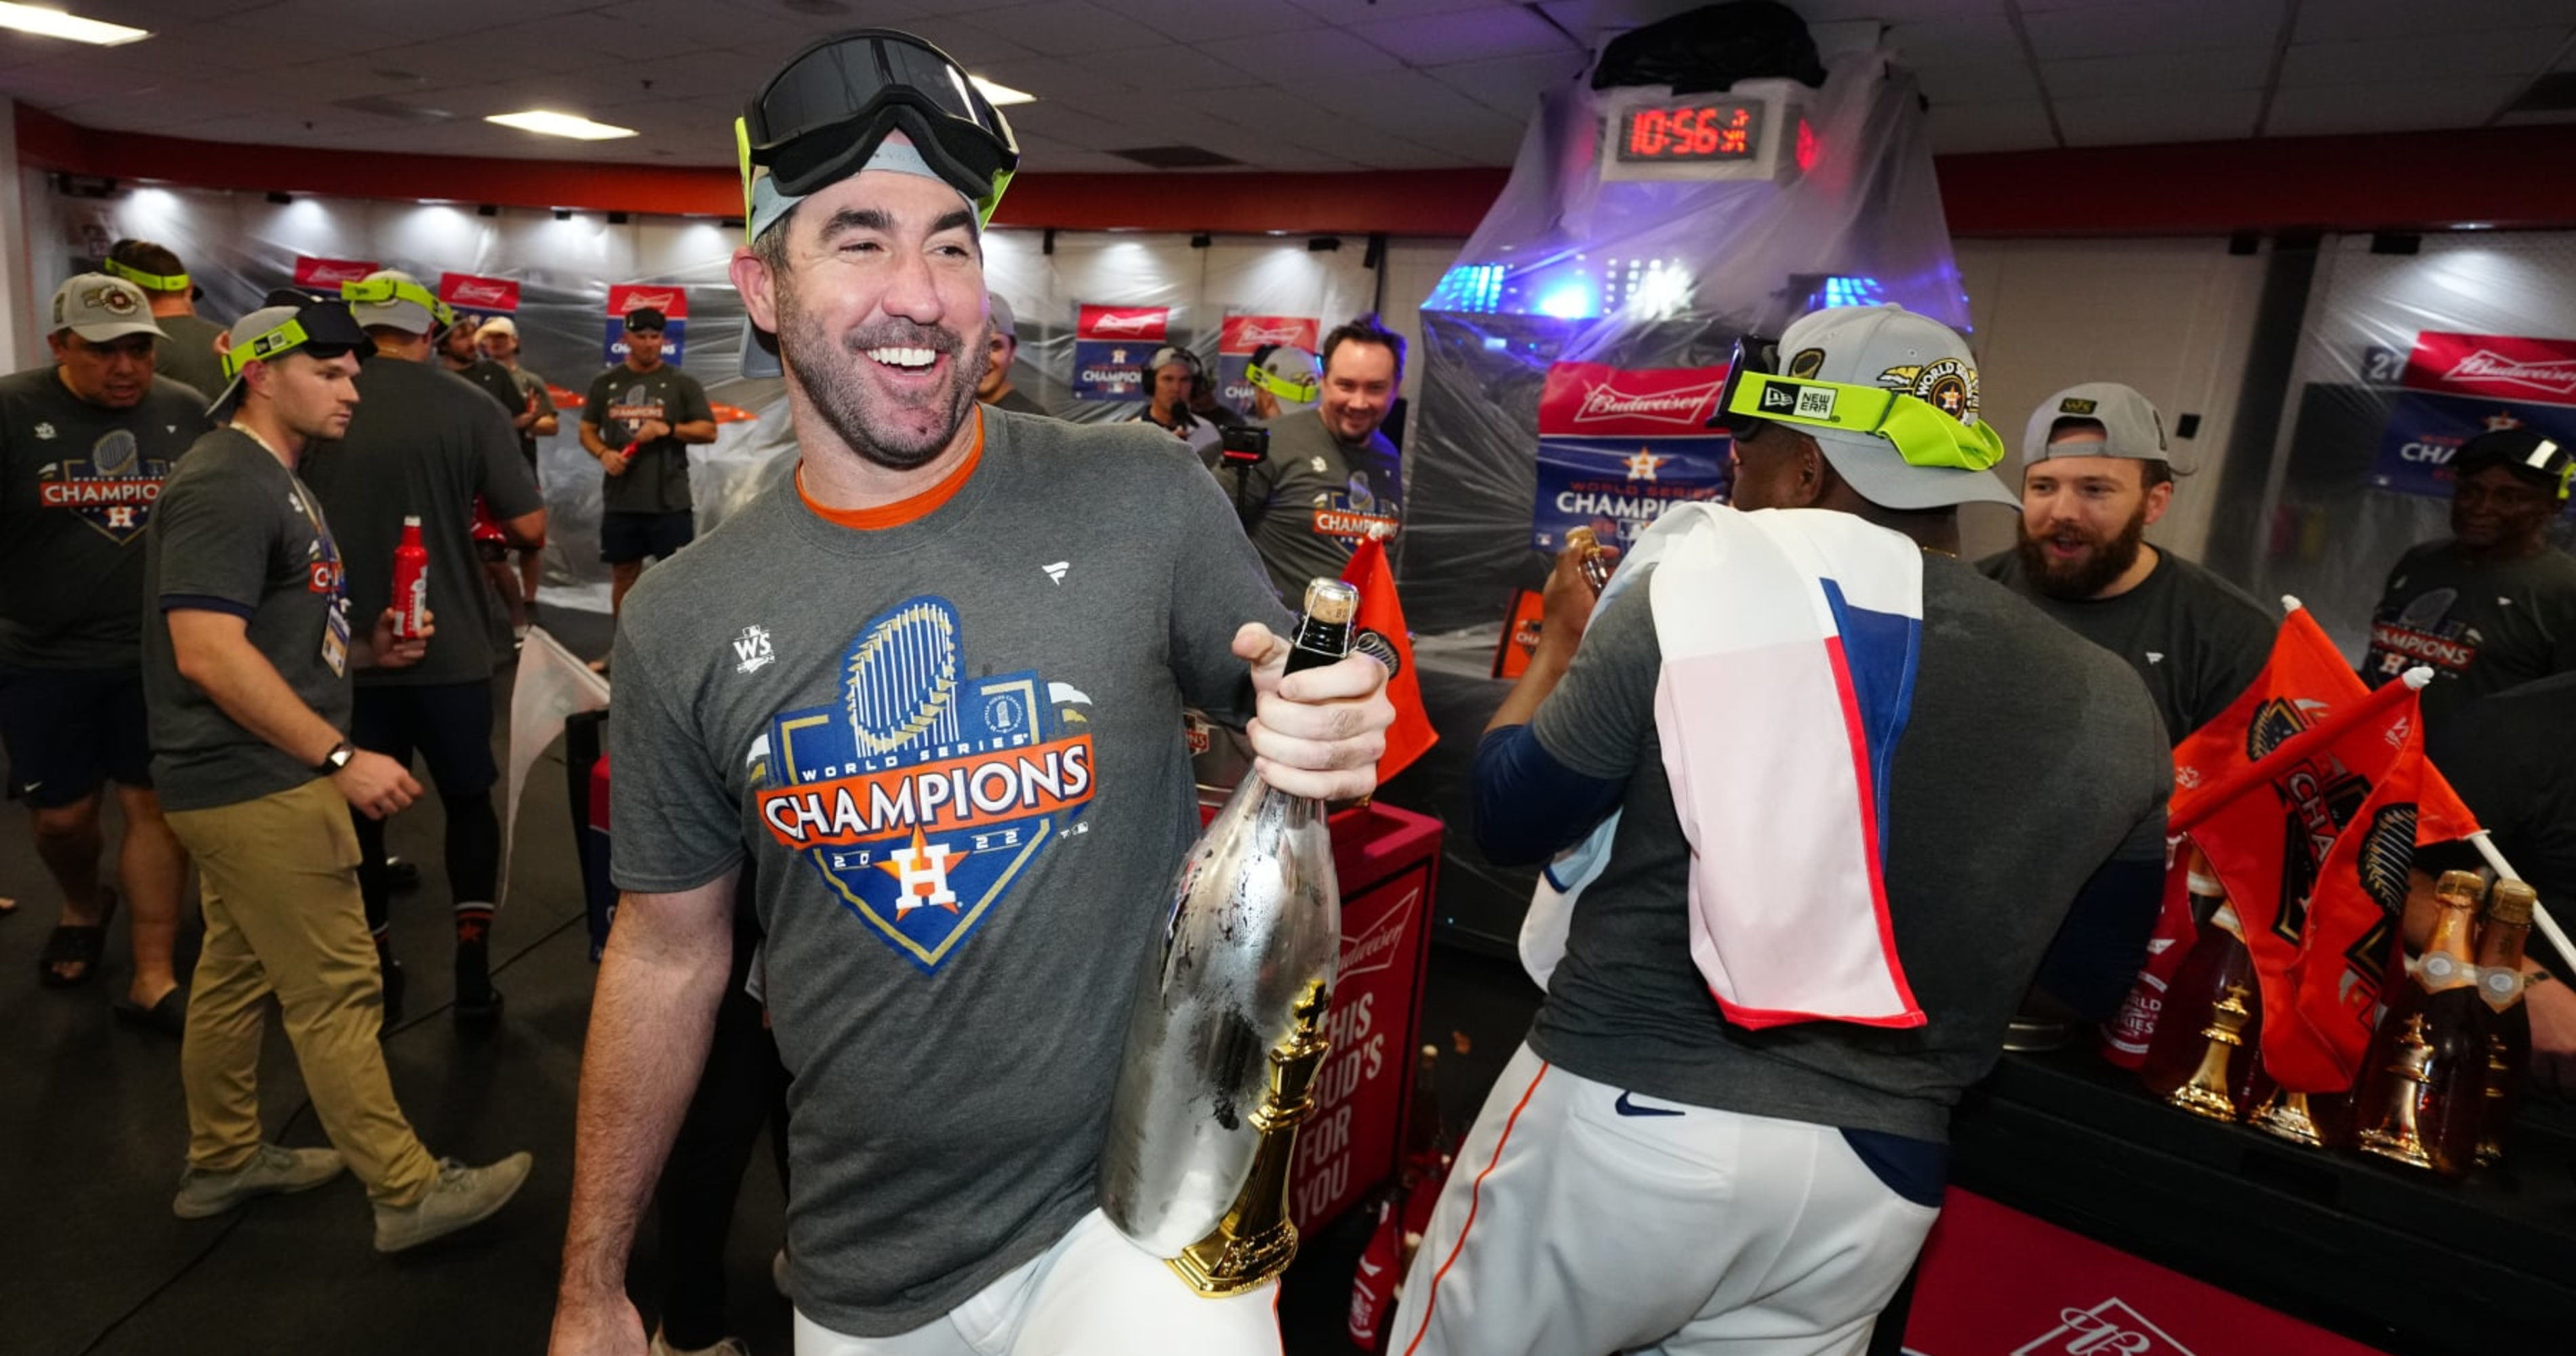 Justin Verlander free agent predictions: From the favorites to the  potential mystery teams